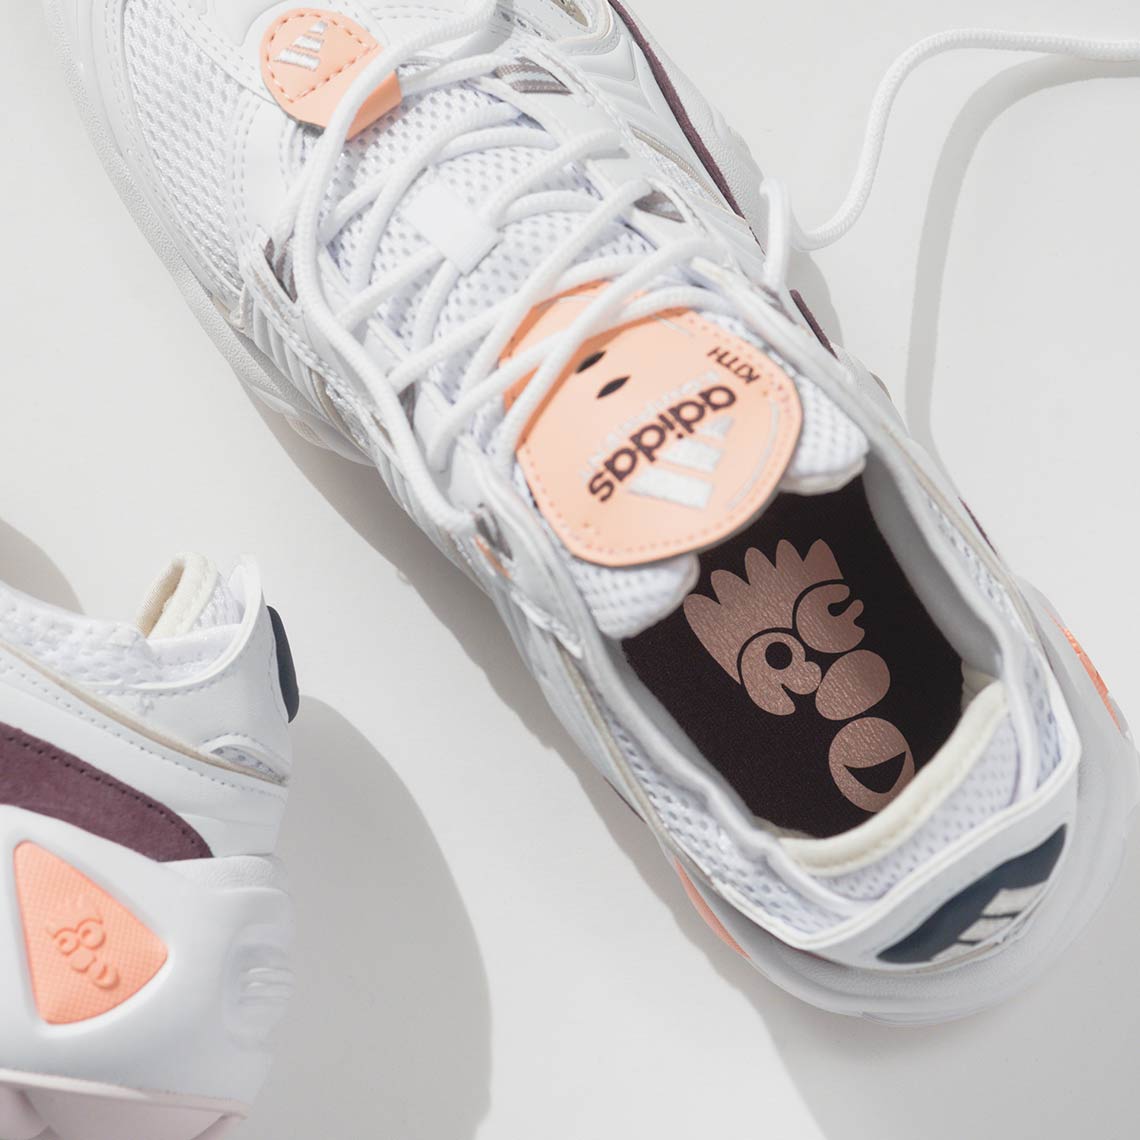 Kith Adidas Fyw S 97 Release Info 8